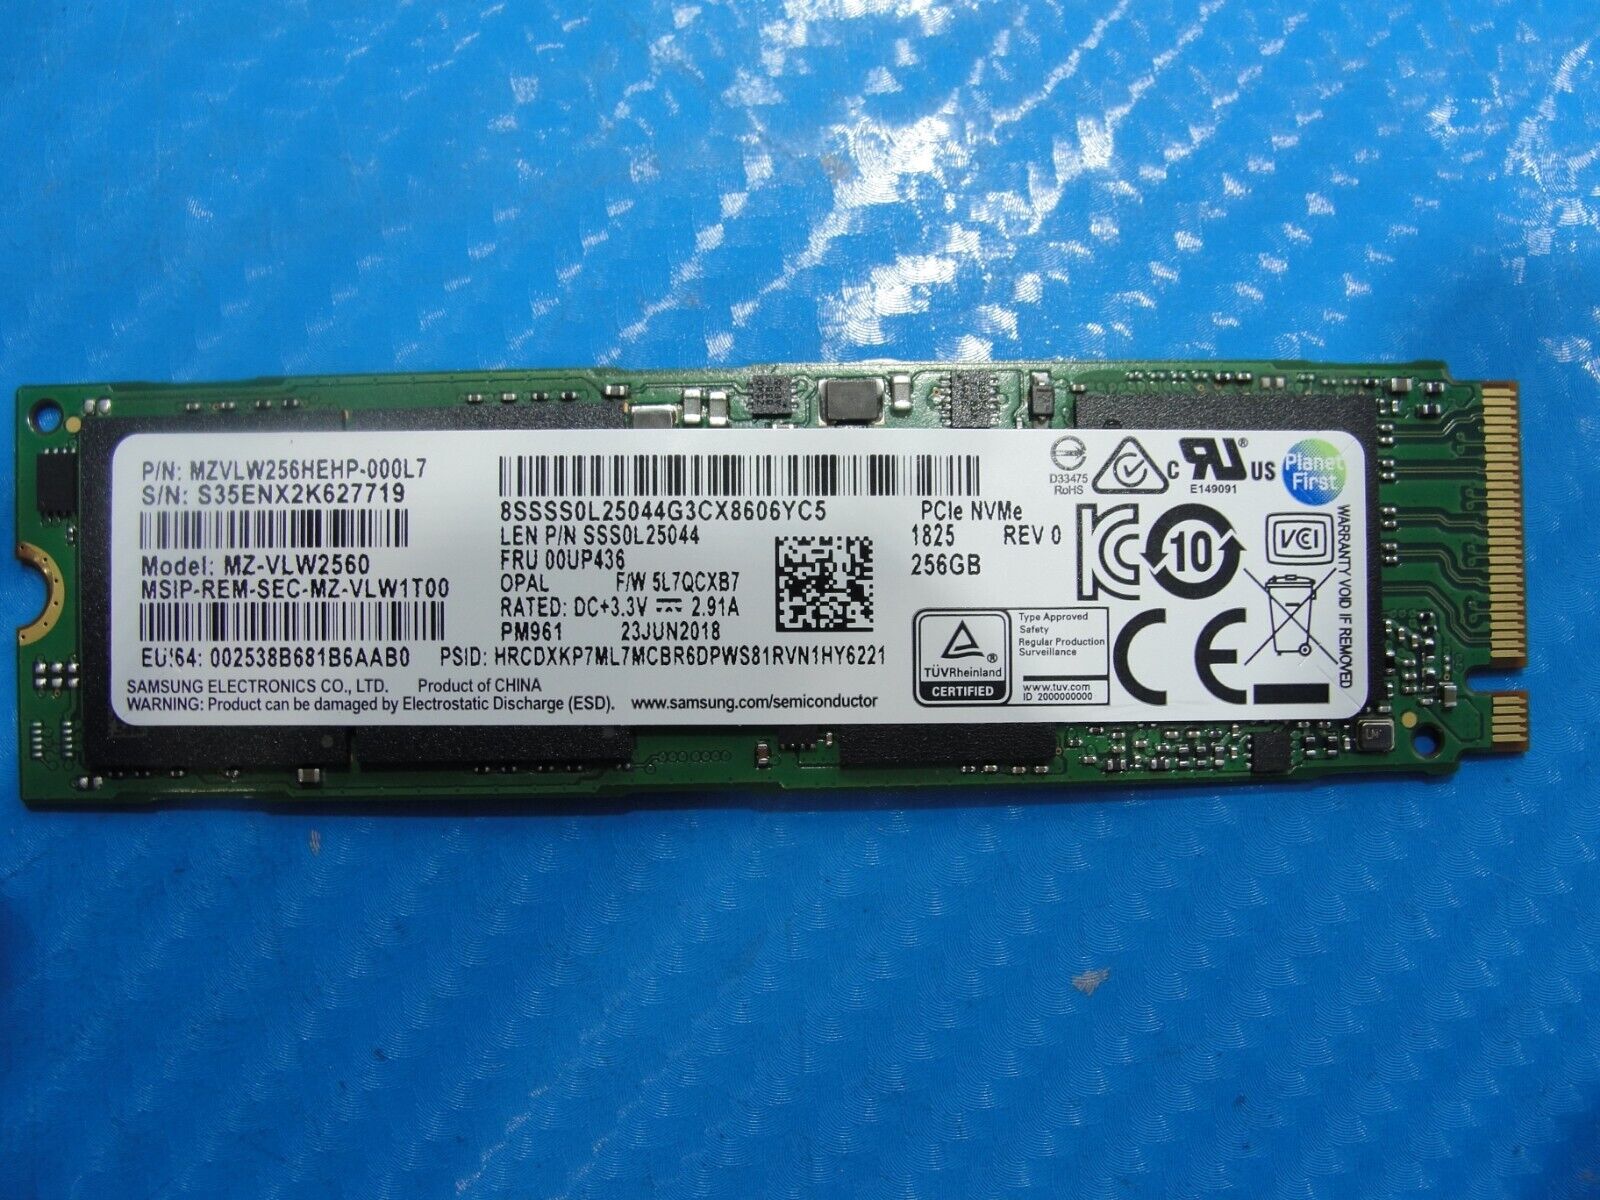 Lenovo T580 256Gb SSD M.2 2280 Solid State Drive PICe NVMe 00UP436 SSS0L25044